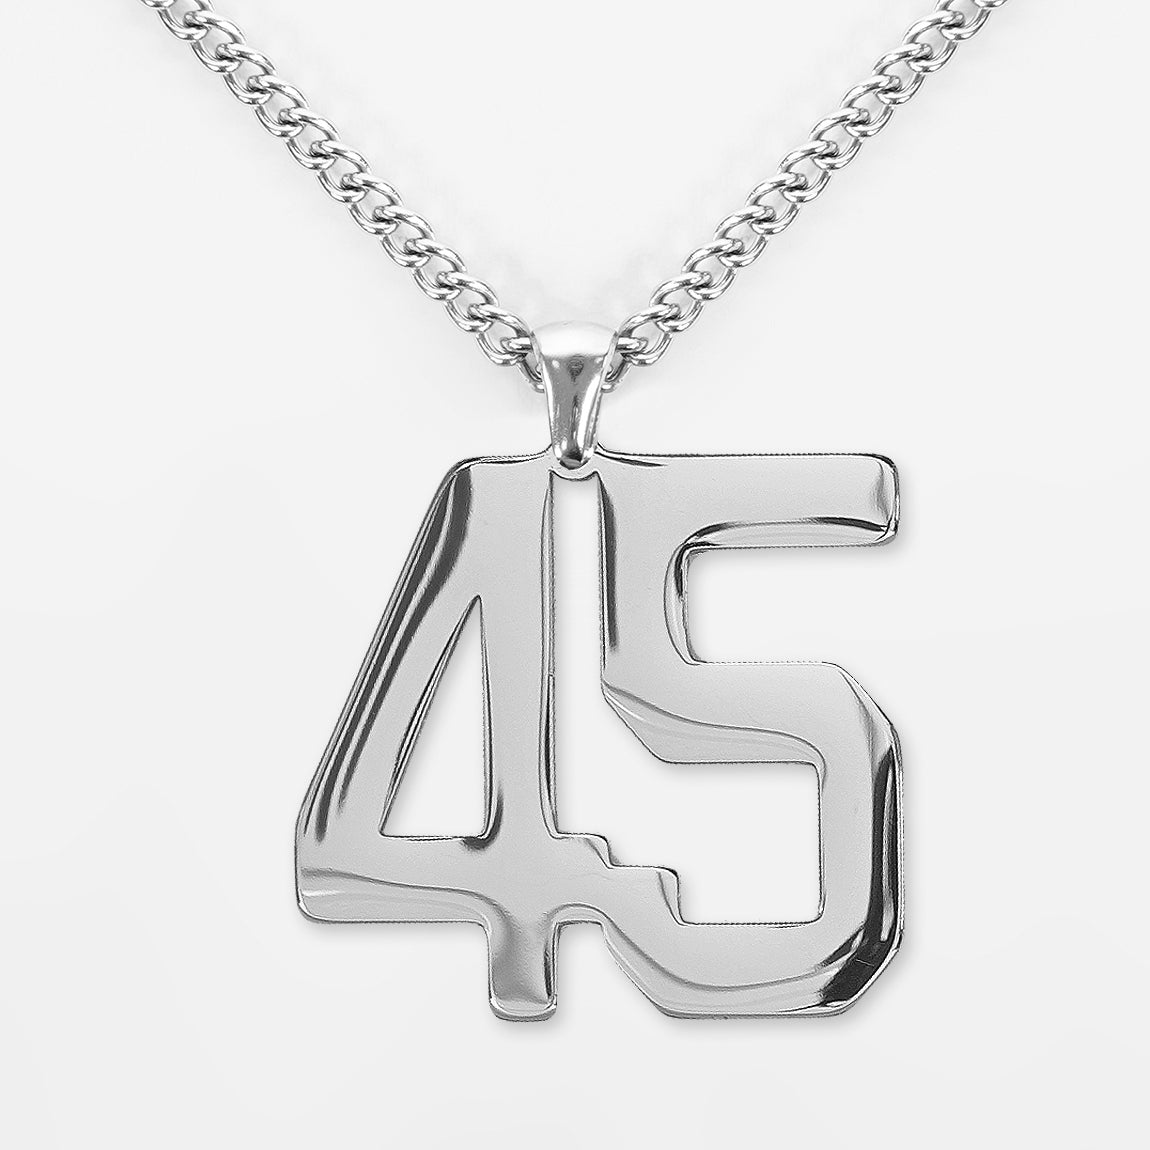 45 Number Pendant with Chain Necklace - Stainless Steel